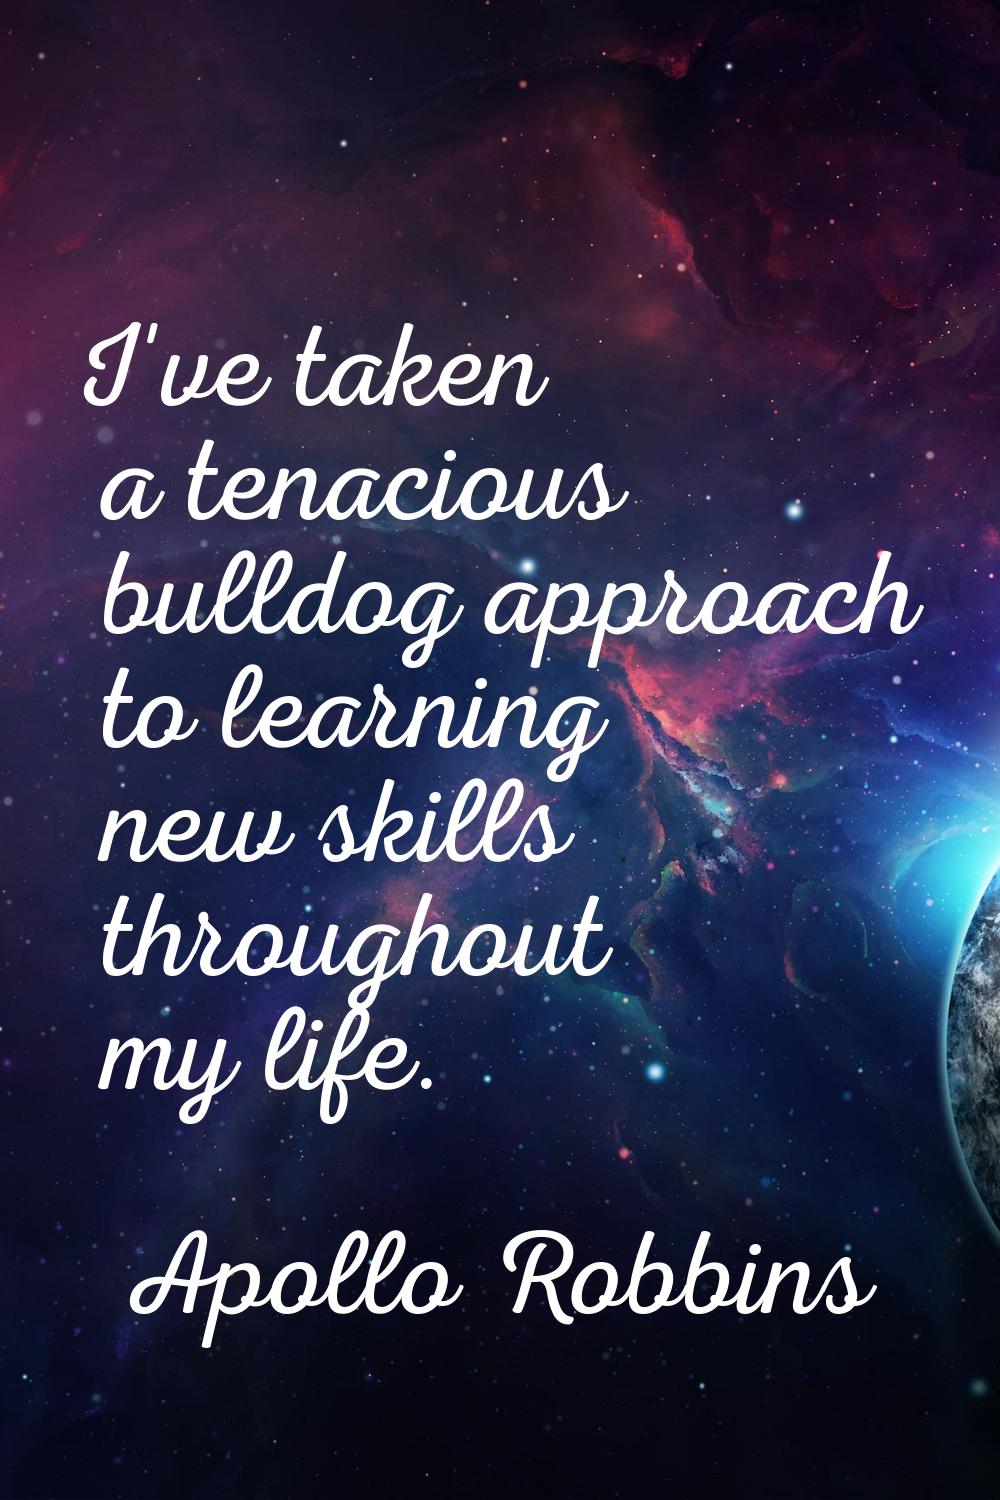 I've taken a tenacious bulldog approach to learning new skills throughout my life.